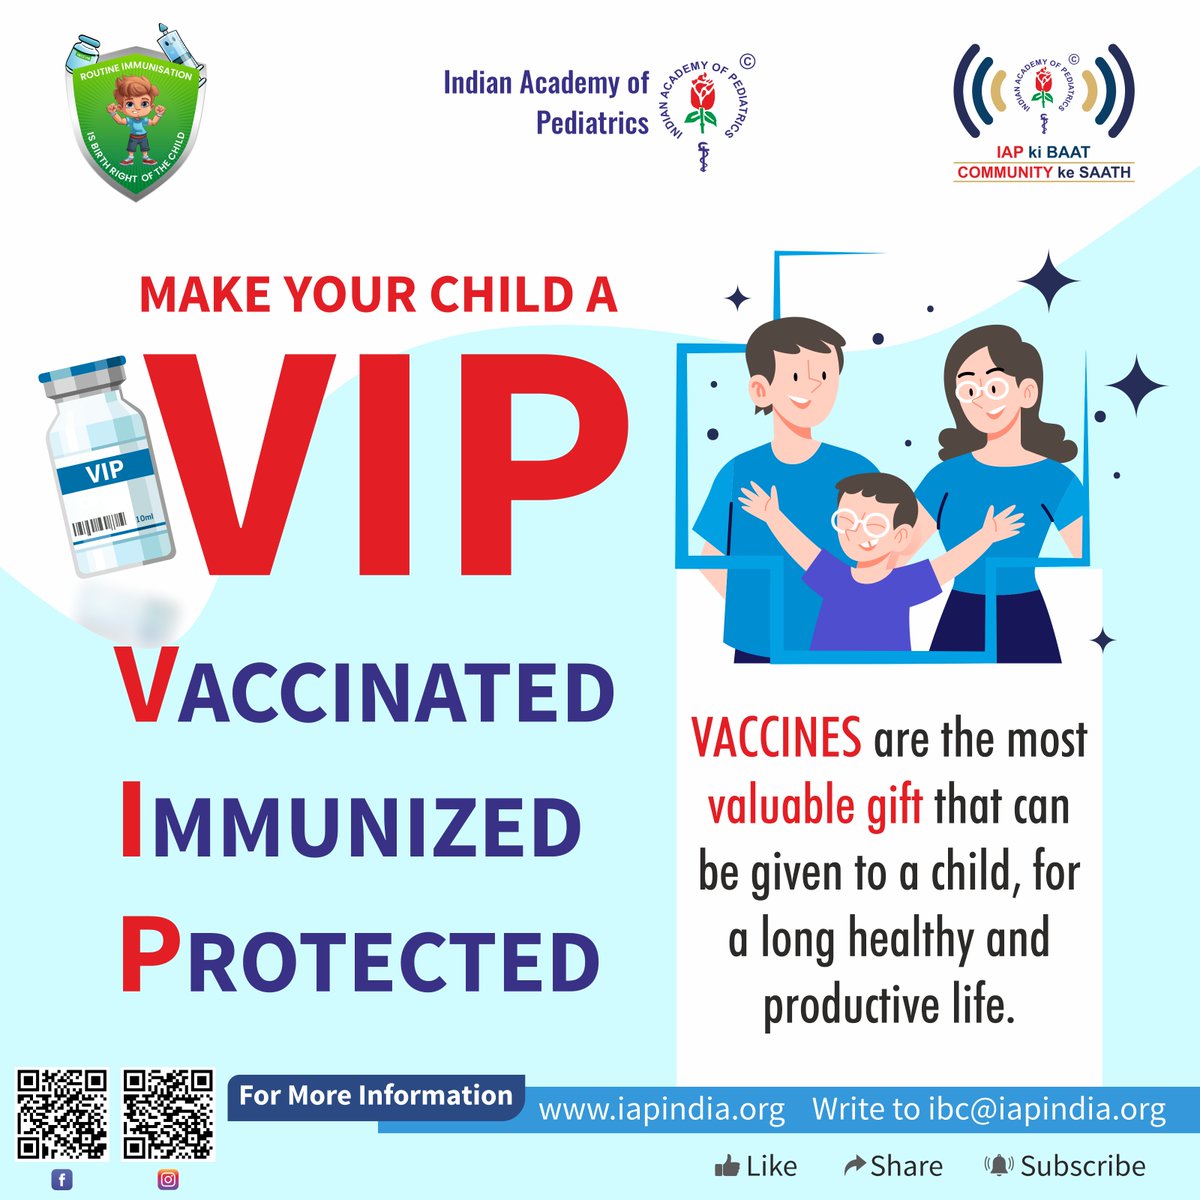 Give your #child the VIP treatment they deserve 👶 💉Ensure they are VACCINATED 🛡️Keep them IMMUNIZED against preventable diseases 💪Keep them PROTECTED for a healthy future #iapkibaat #IAP #indianacademyofpediatrics #pediatrics #childcare #childhealth #immunization